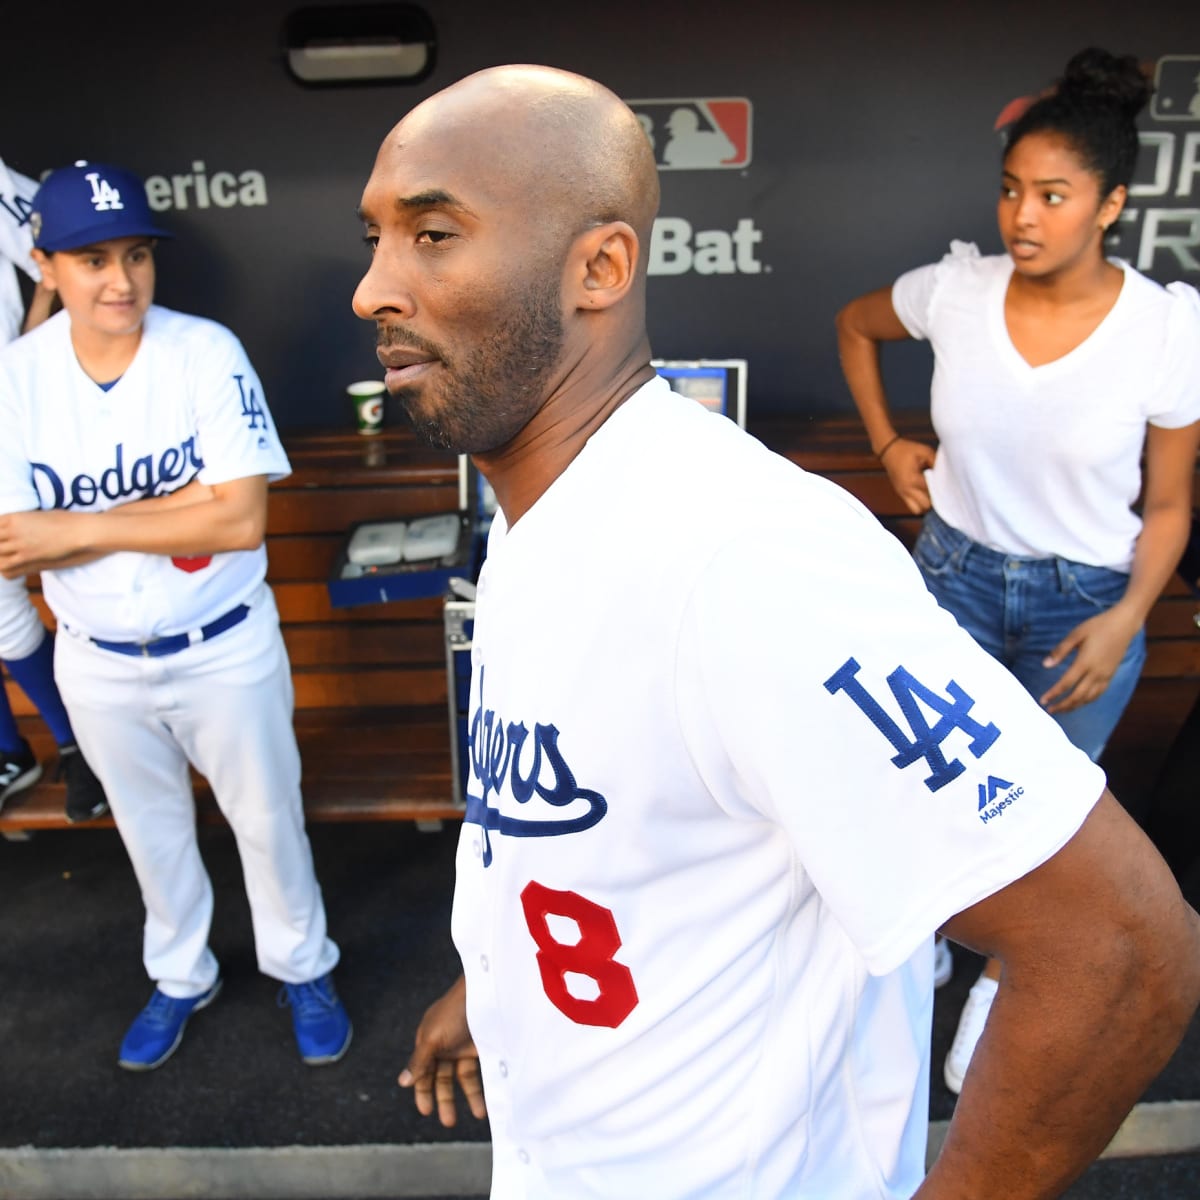 Dodgers to Give Away Kobe Bryant Baseball Jerseys in Lakers Night